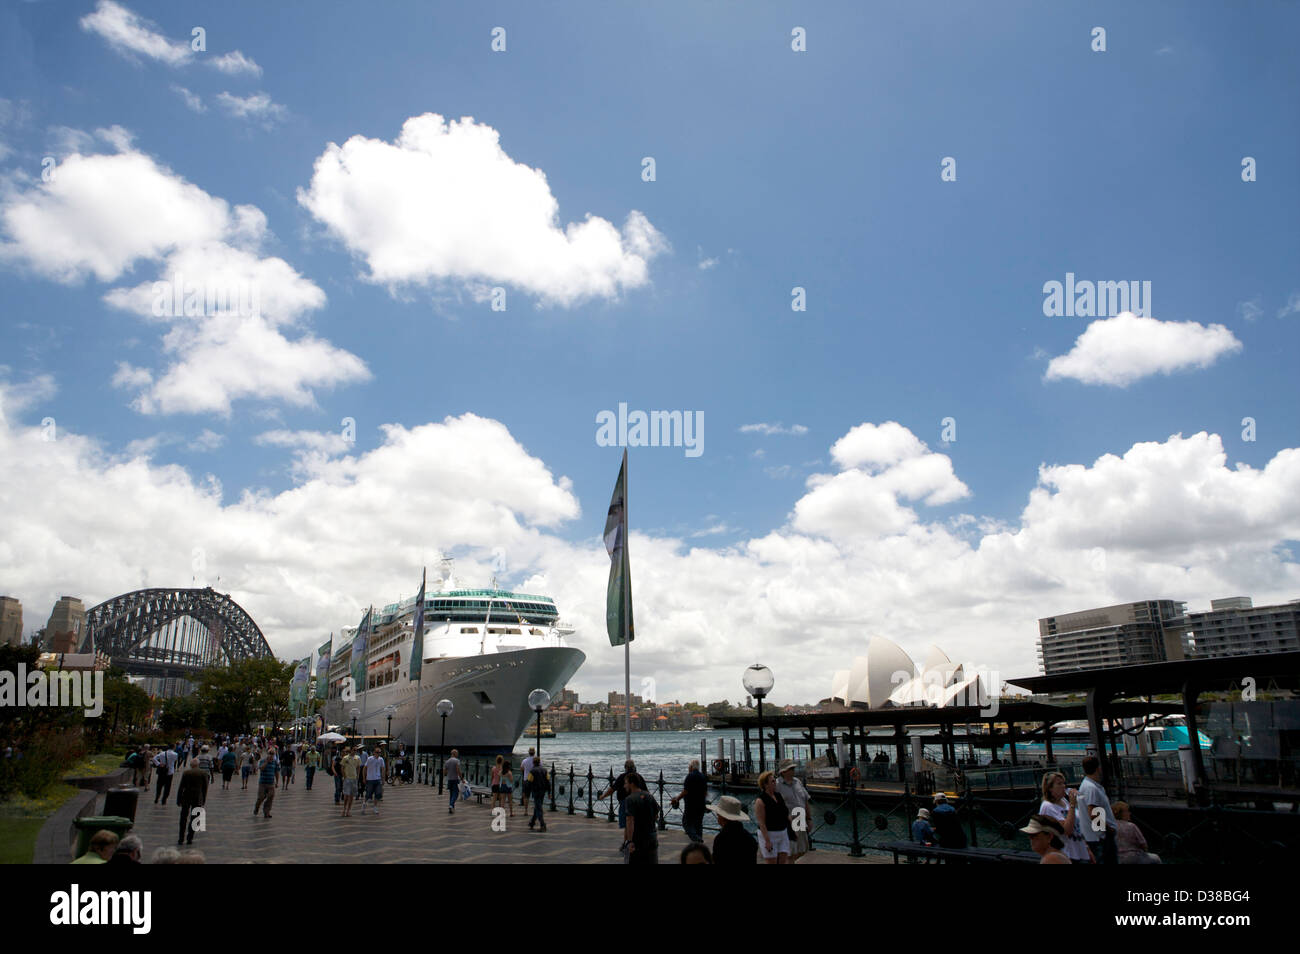 A large Ocean Liner docked in Sydney Harbour Australia, with a distant view of the Sydney Harbour Bridge and Sydney Opera House in the background. Stock Photo